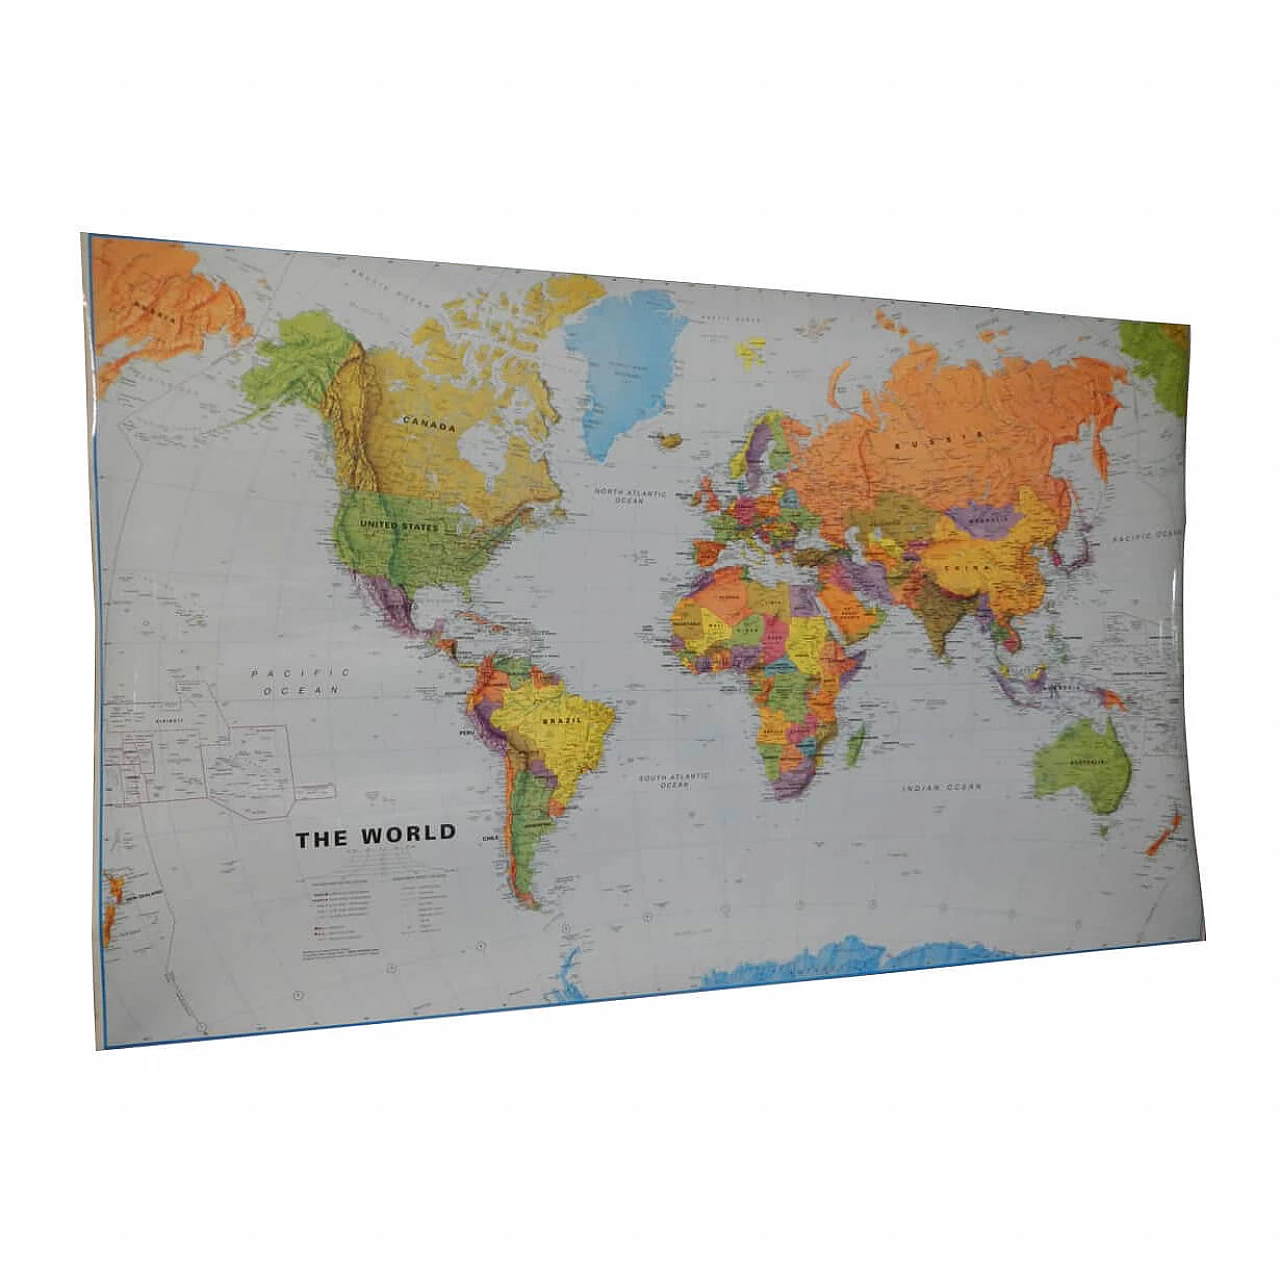 World map in laminated paper, 2000s 12